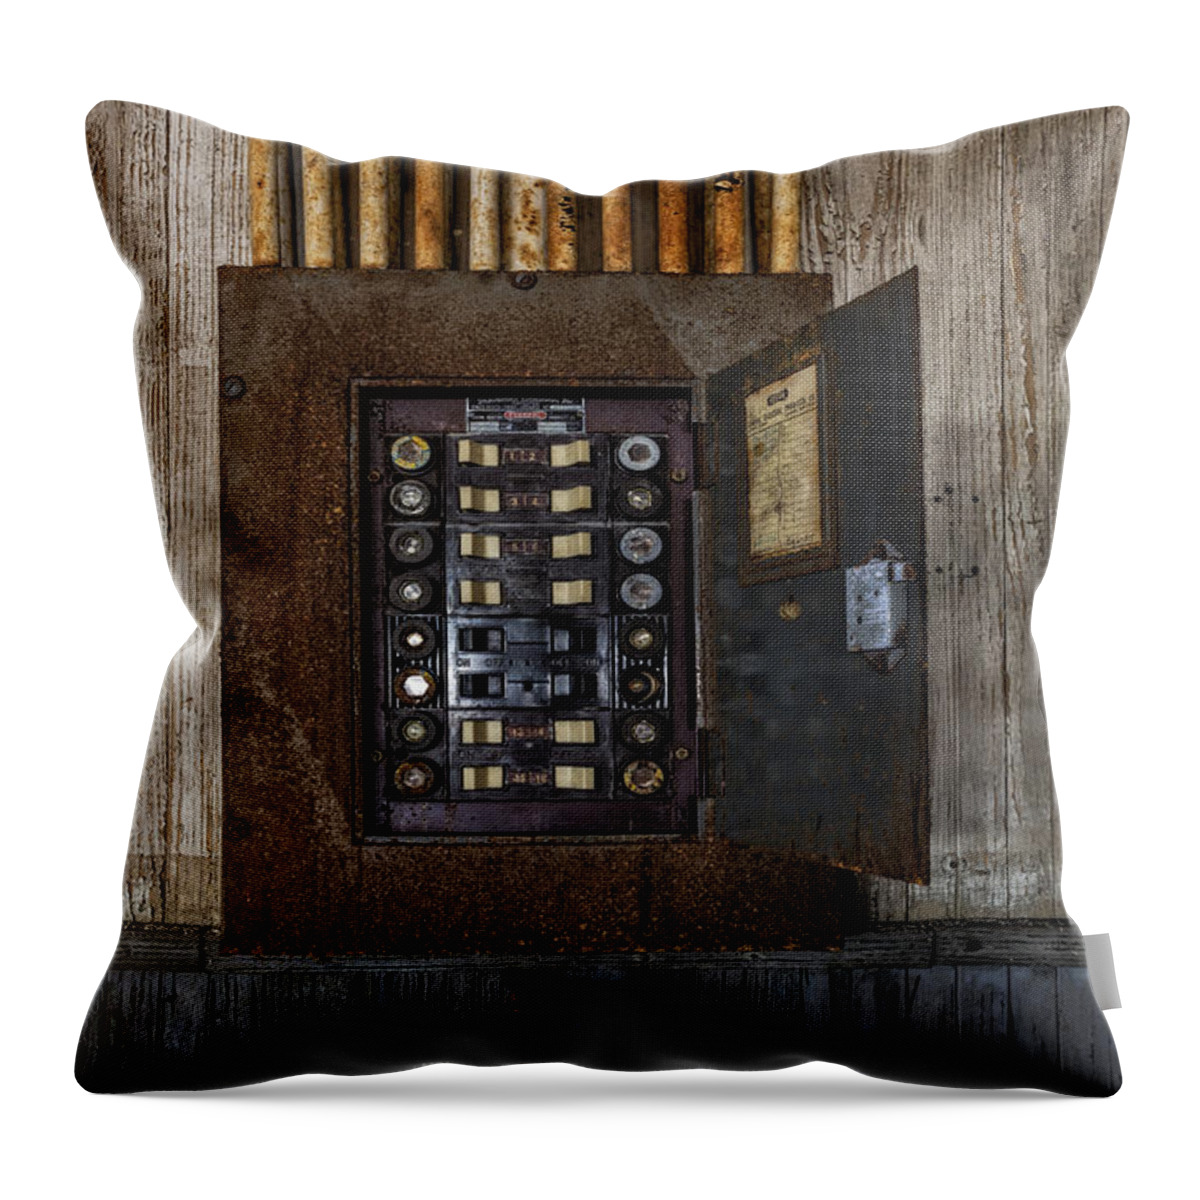 Electrician Throw Pillow featuring the photograph Vintage Electric Panel by Susan Candelario